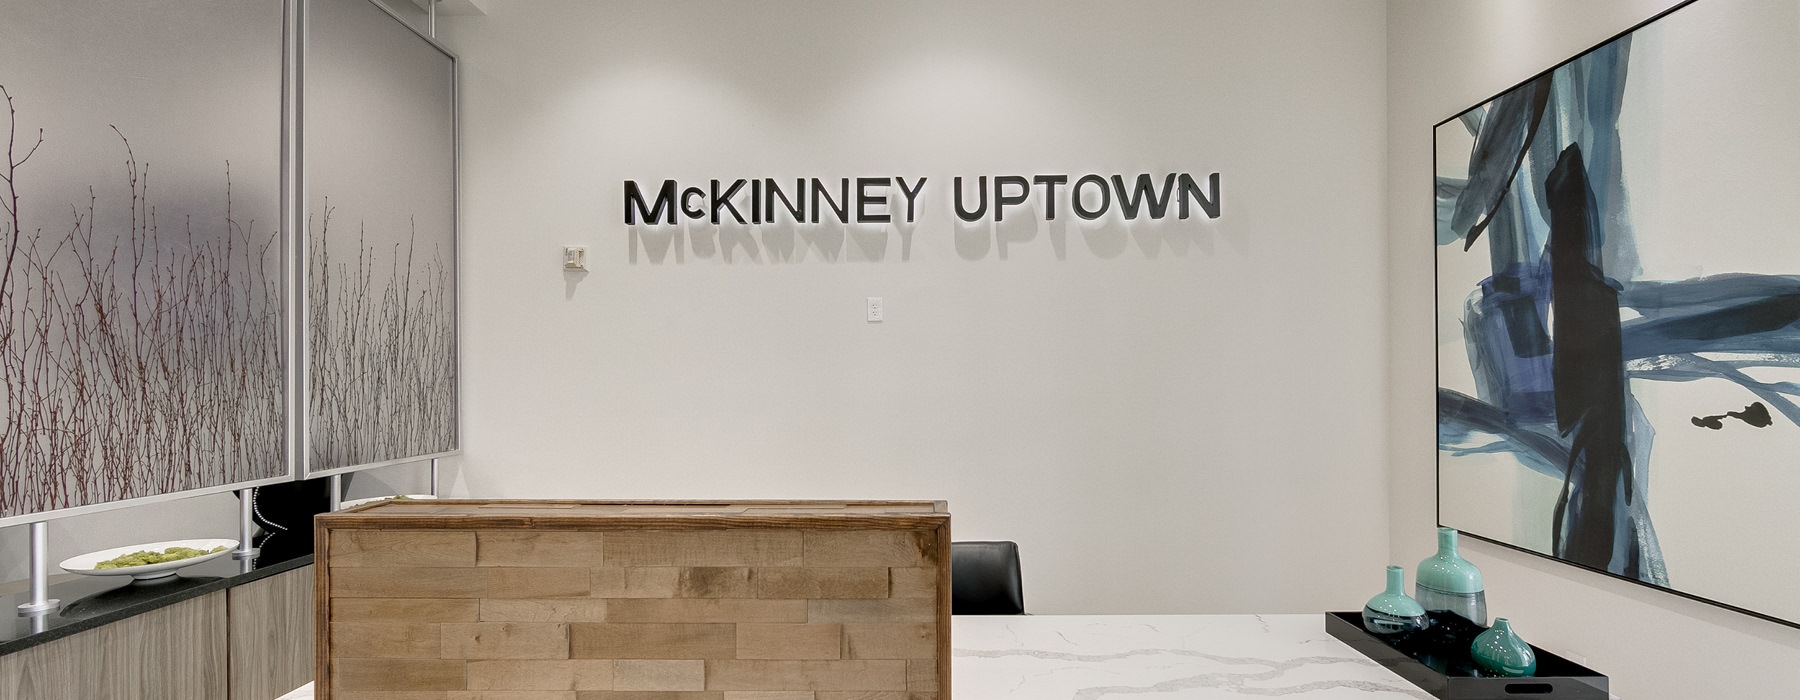 McKinney Uptown sign, mounted on wall above concierge area in lobby